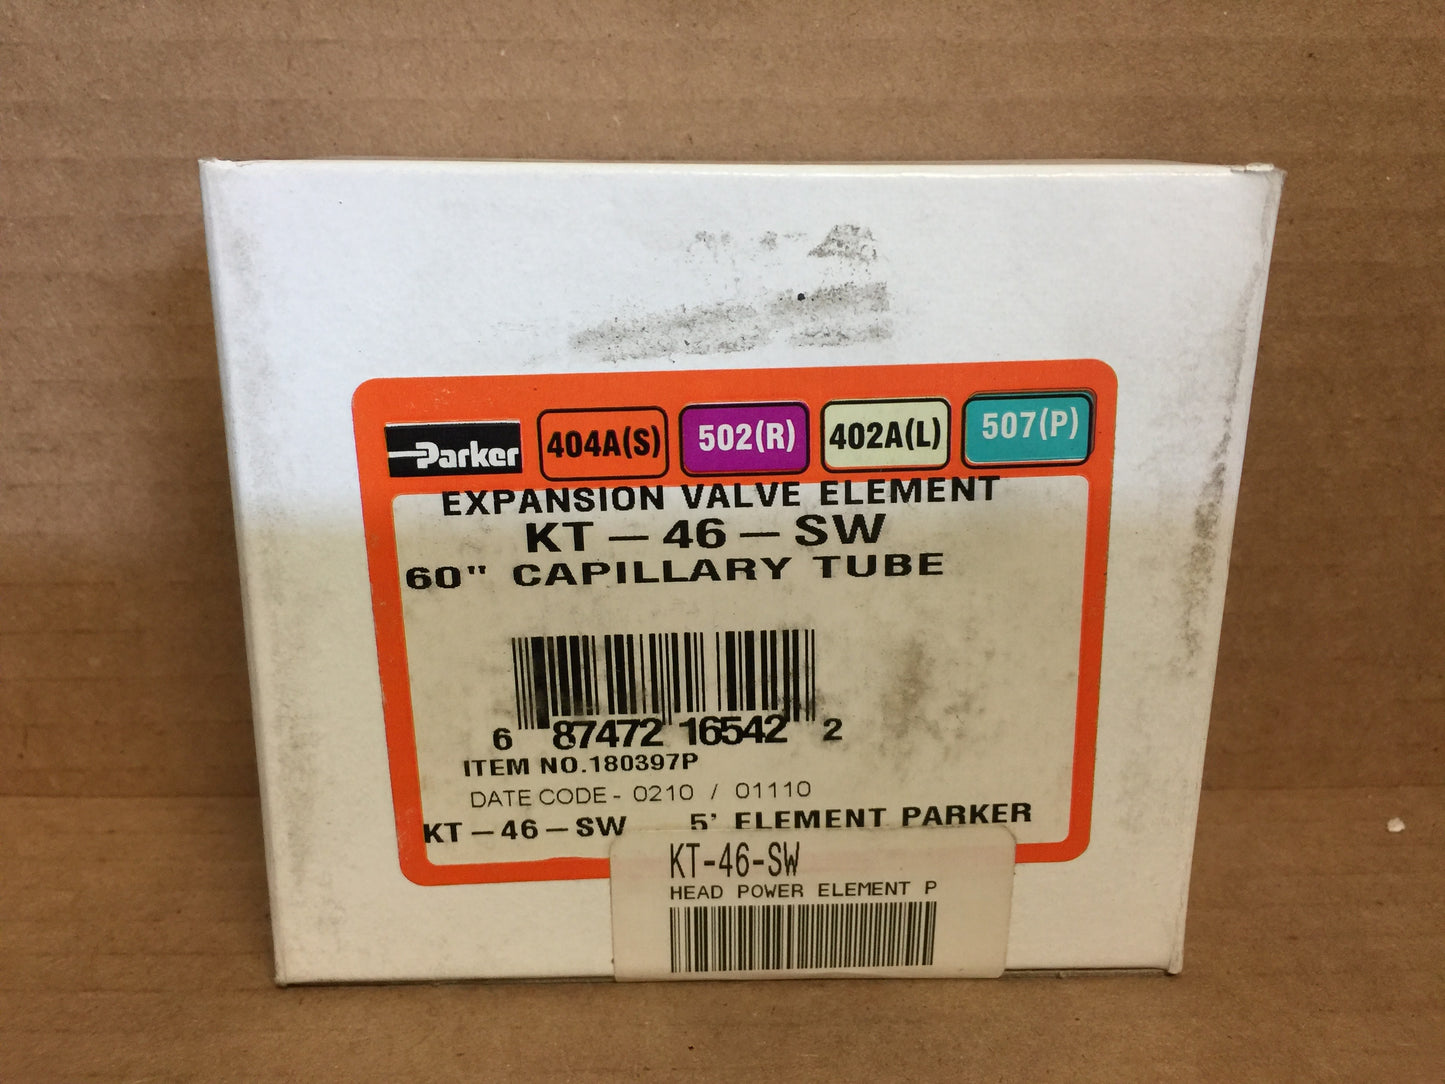 HEAD POWER EXPANSION VALVE ELEMENT; FOR C VALVE BENCH; FOR R-502, R-404 AND R-507